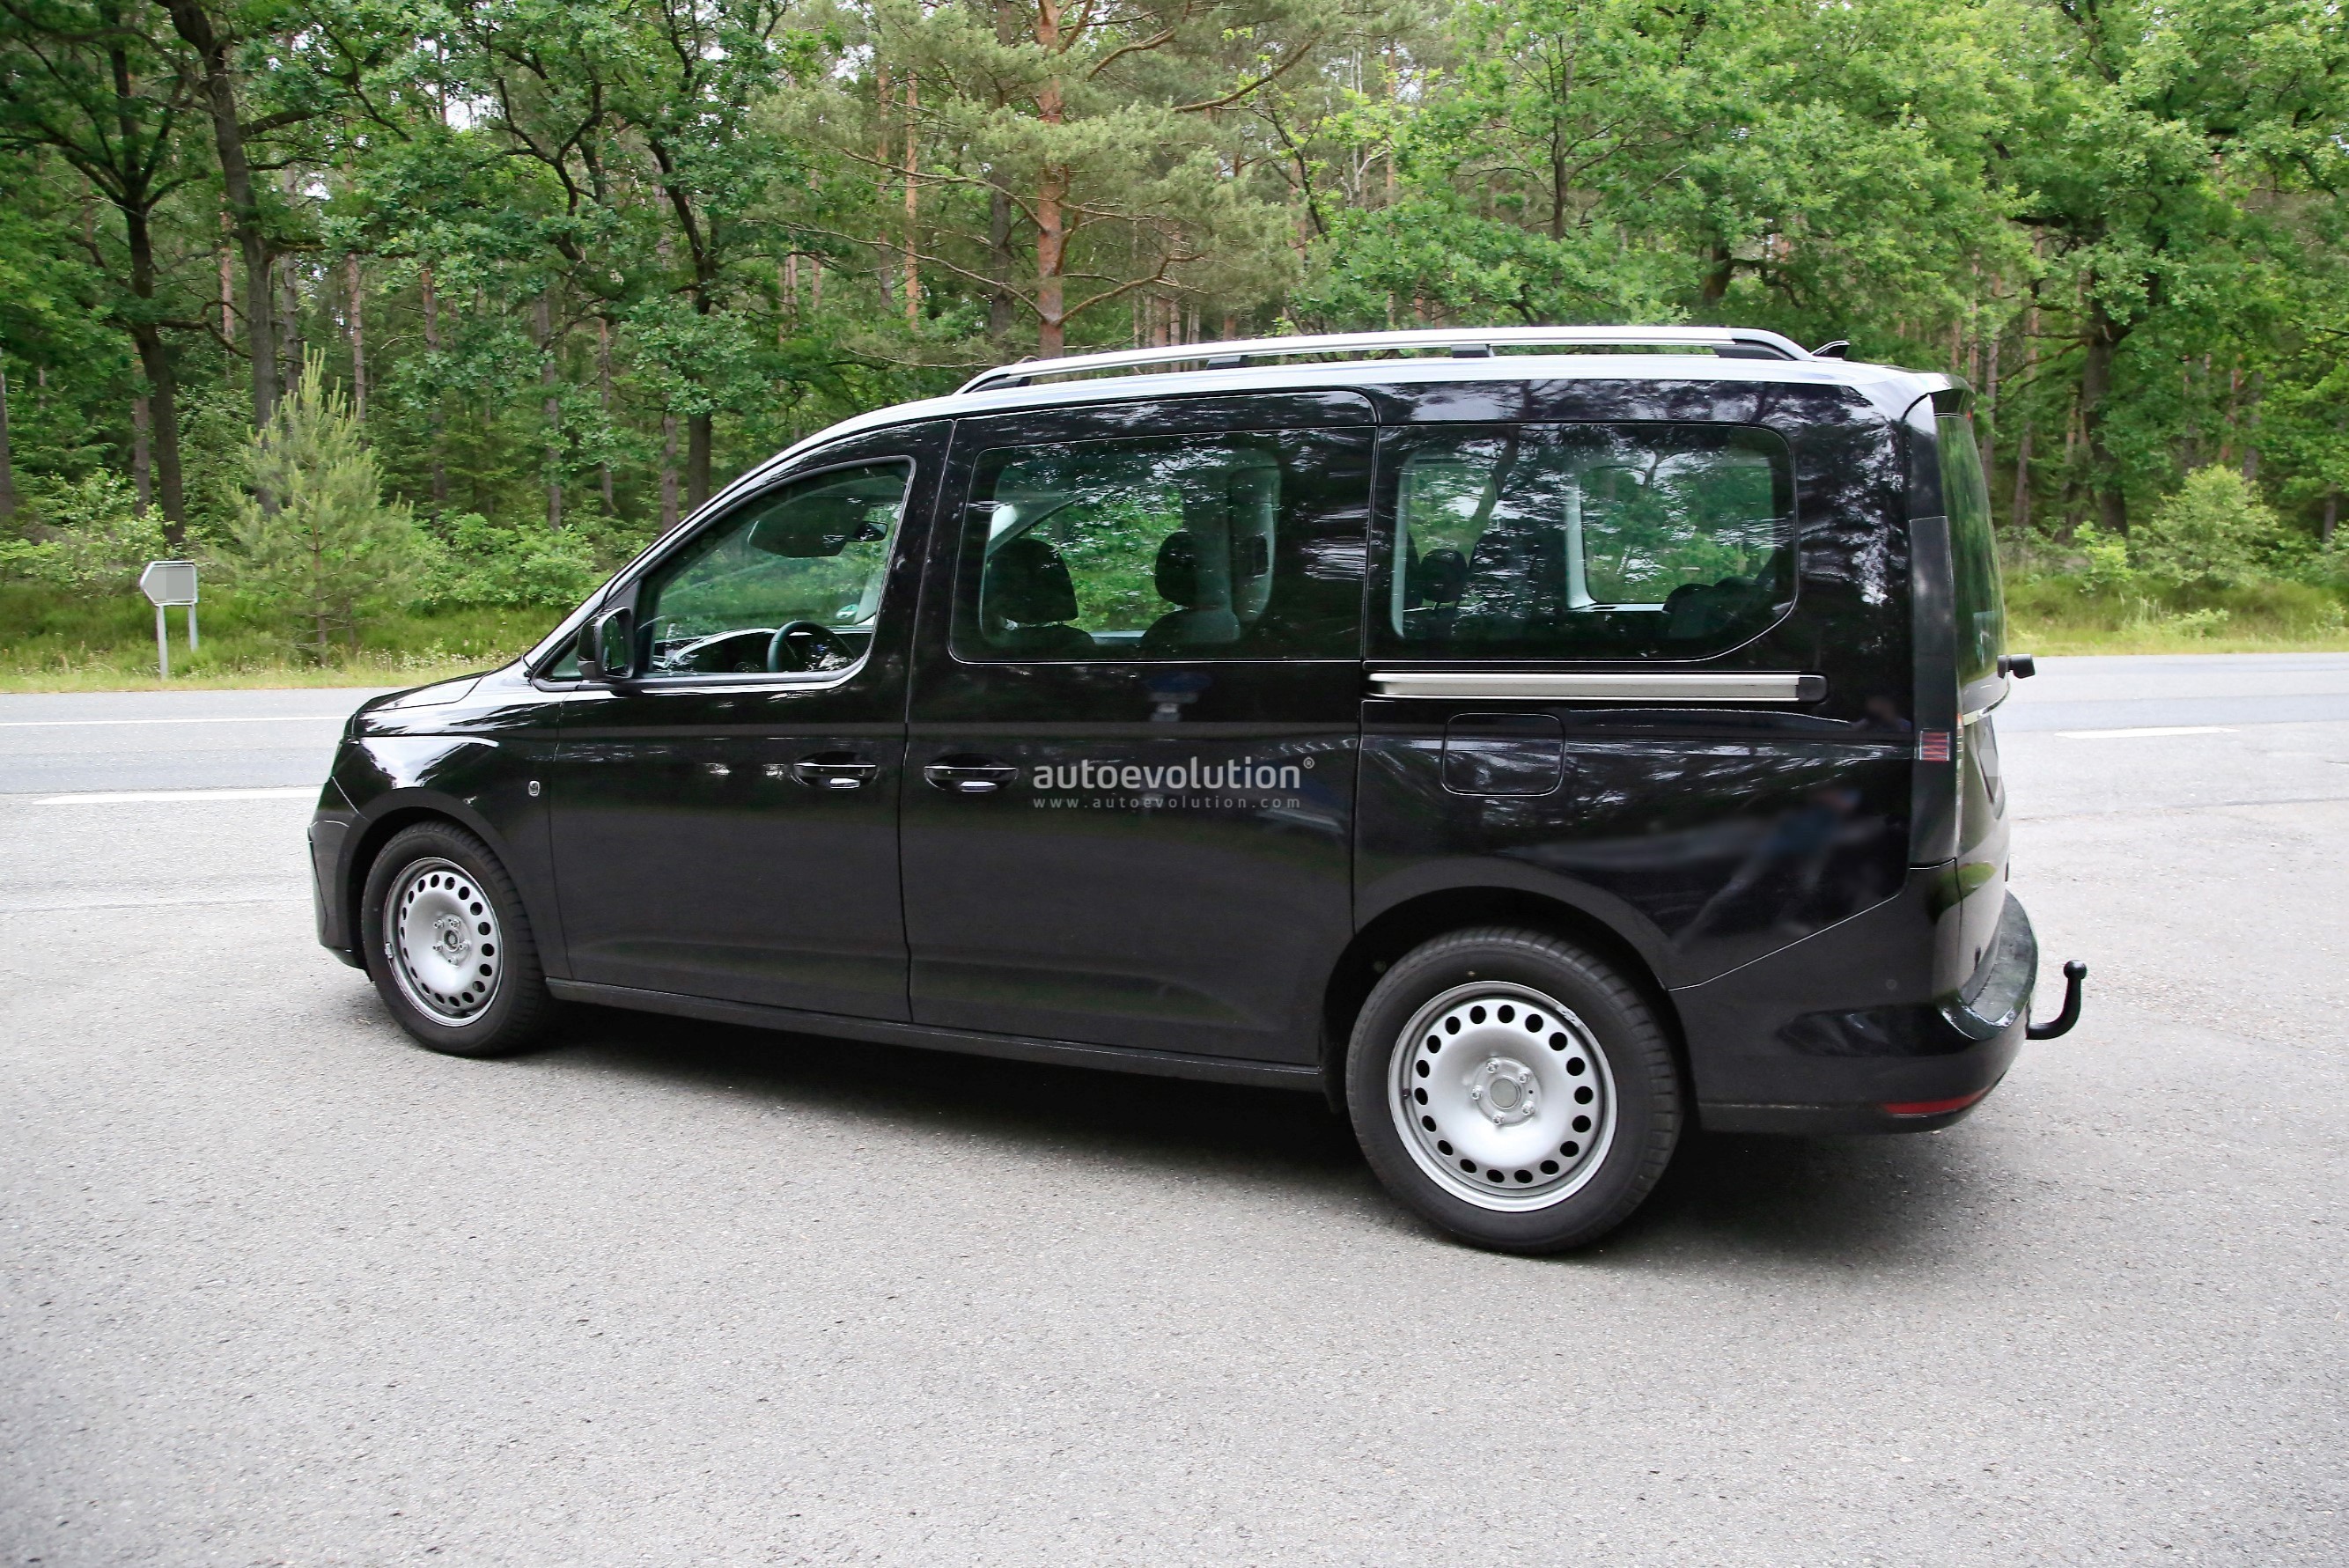 Ford's Hybrid Tourneo Connect Spied Testing With VW Caddy Badges